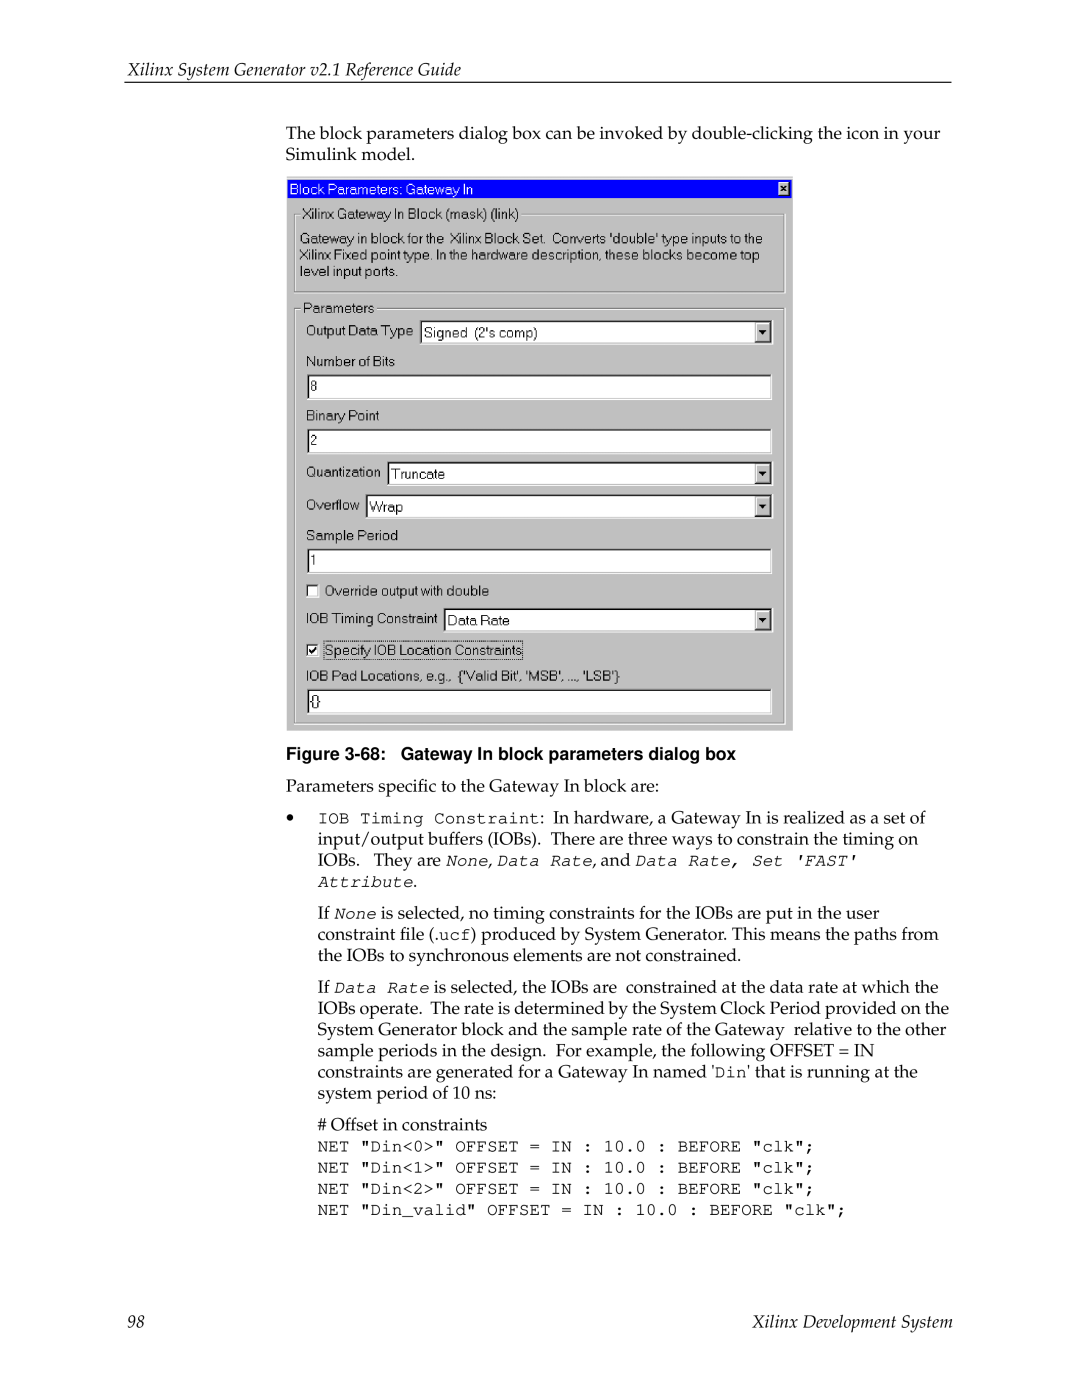 Xilinx V2.1 manual Xilinx System Generator v2.1 Reference Guide, Parameters speciﬁc to the Gateway In block are 